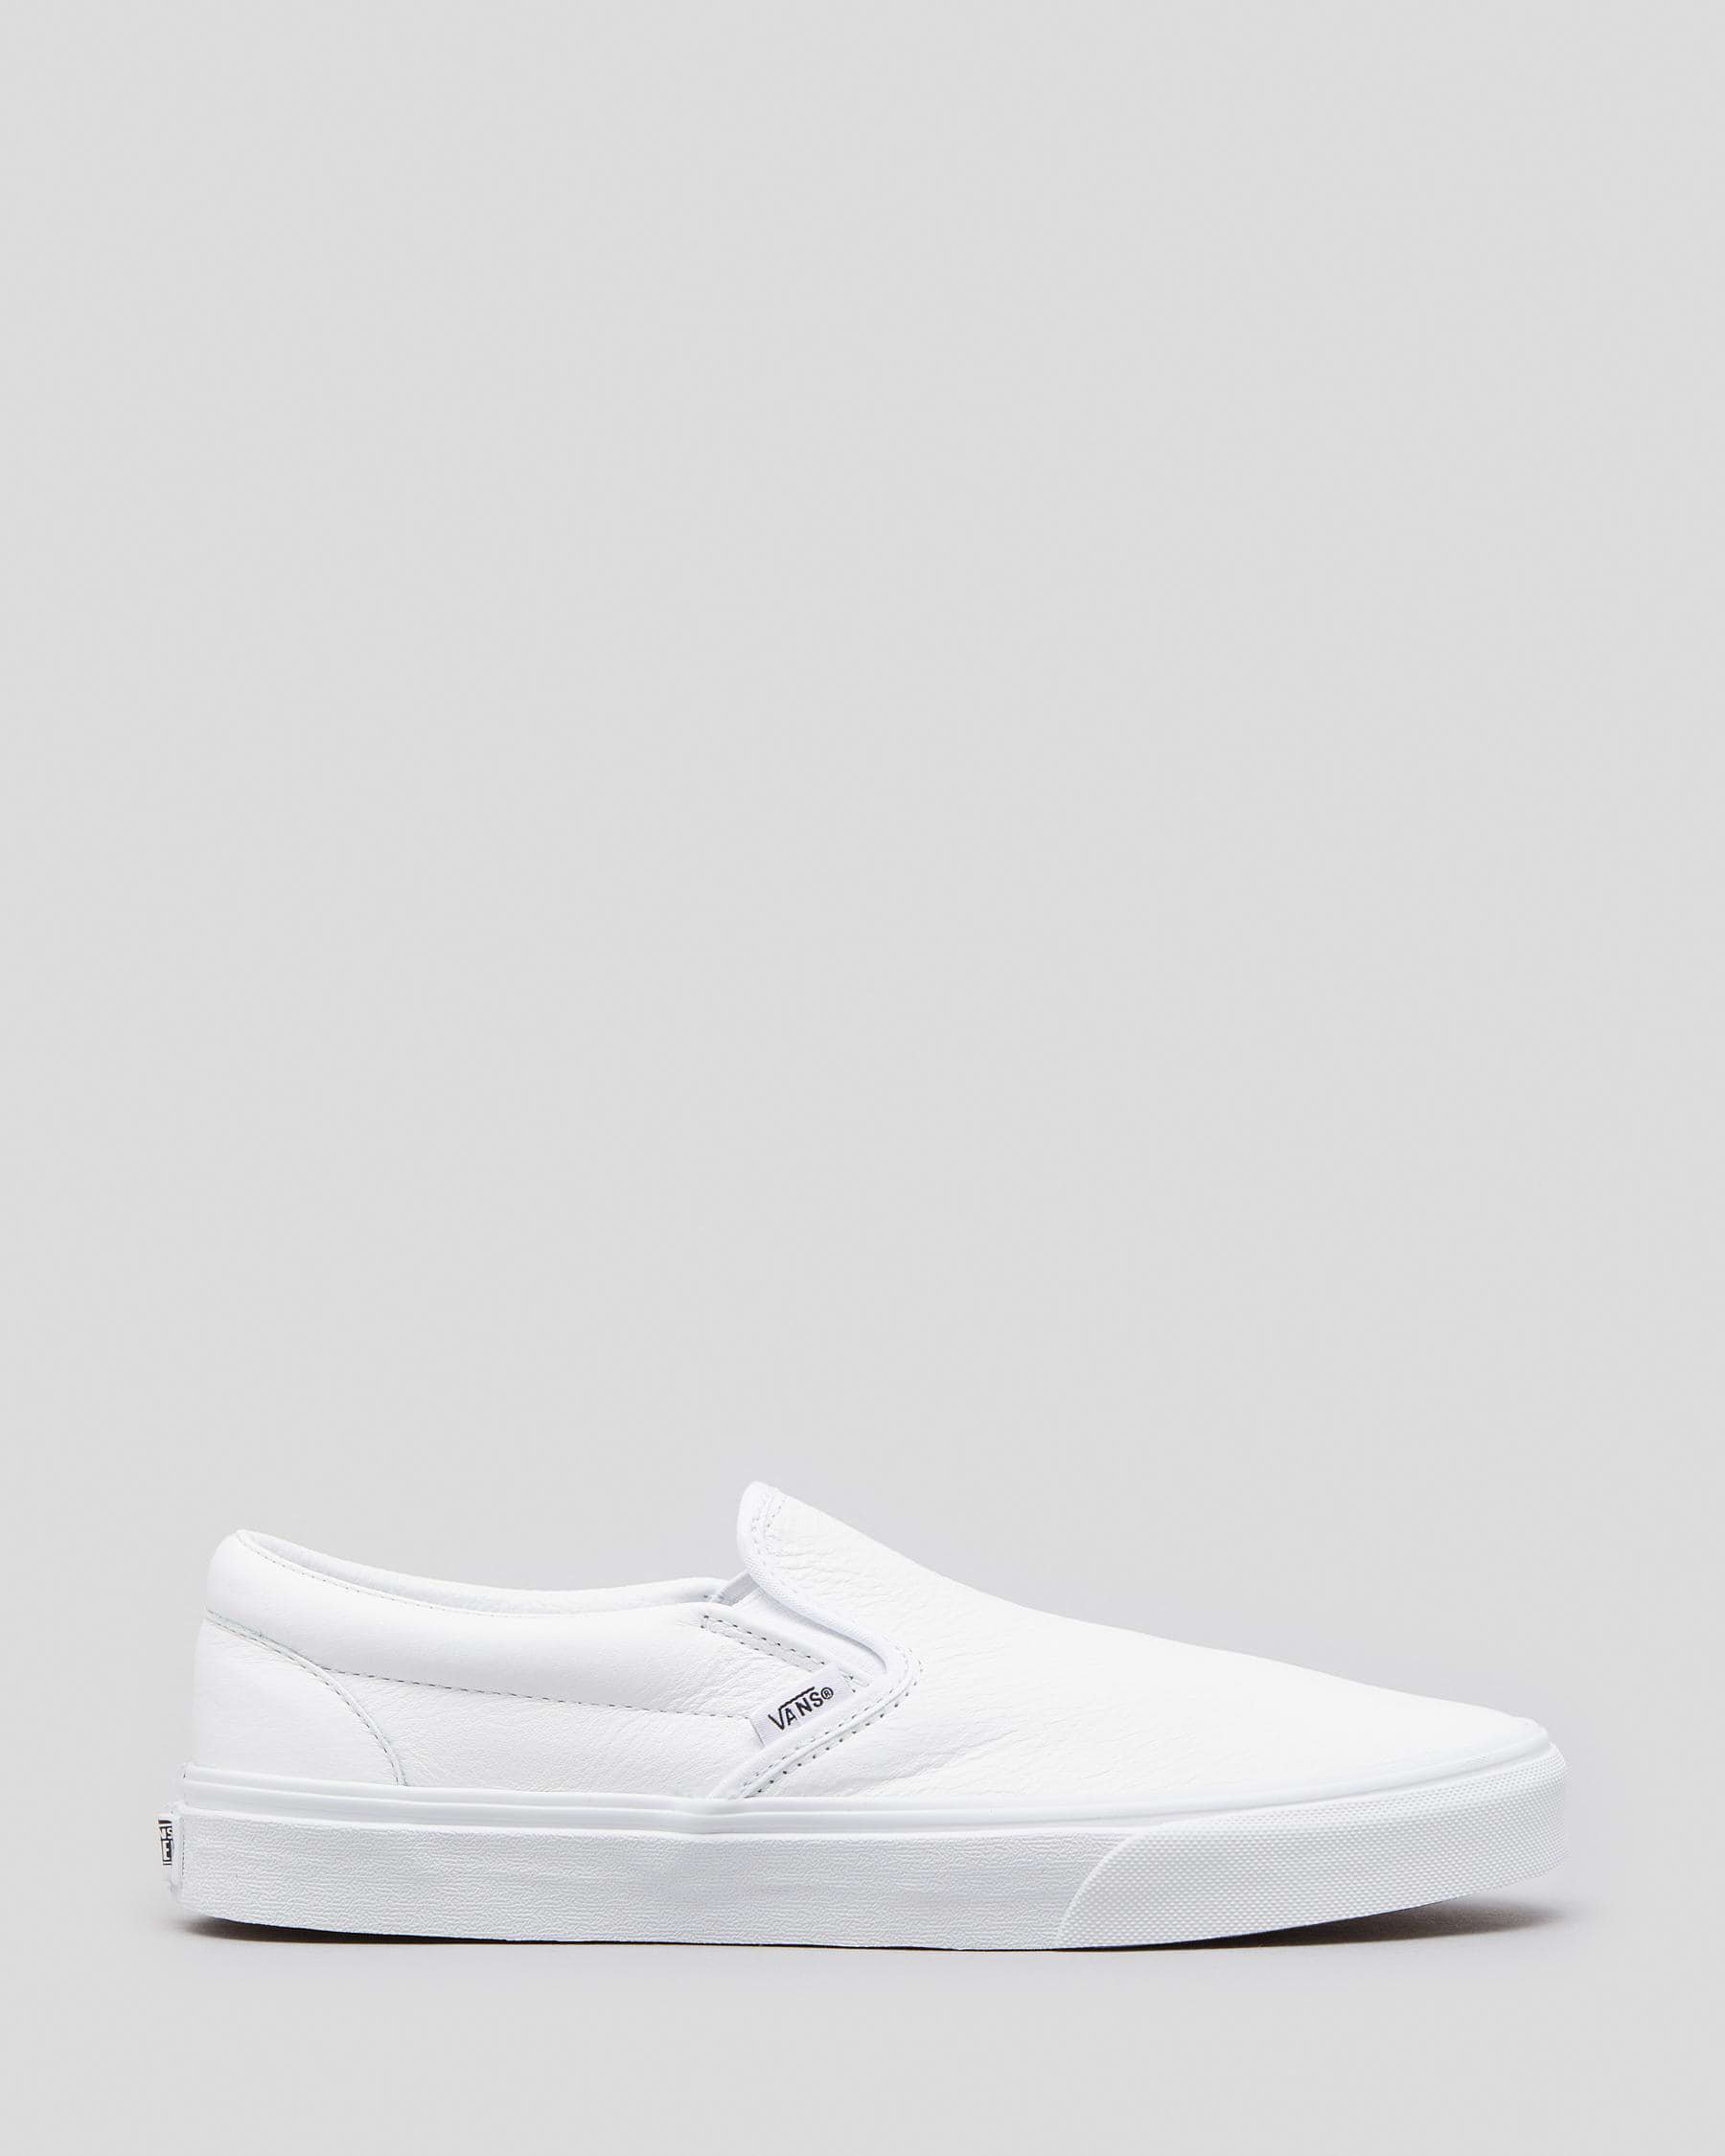 Vans Classic Slip-On Leather Shoes In True White - Fast Shipping & Easy ...